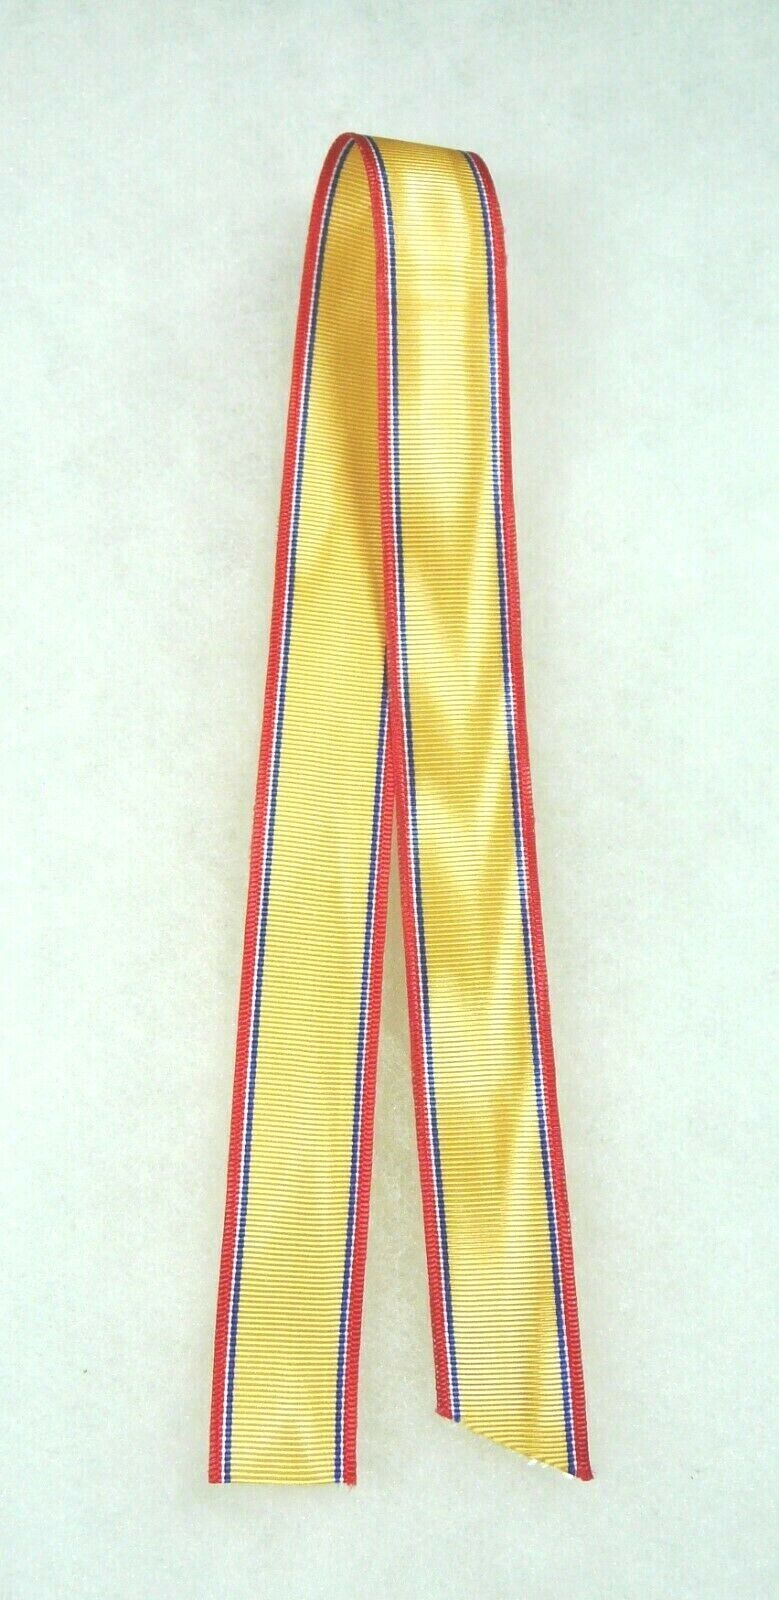 US Attorney General Exceptional Heroism Medal miniature ribbon 12 inches 